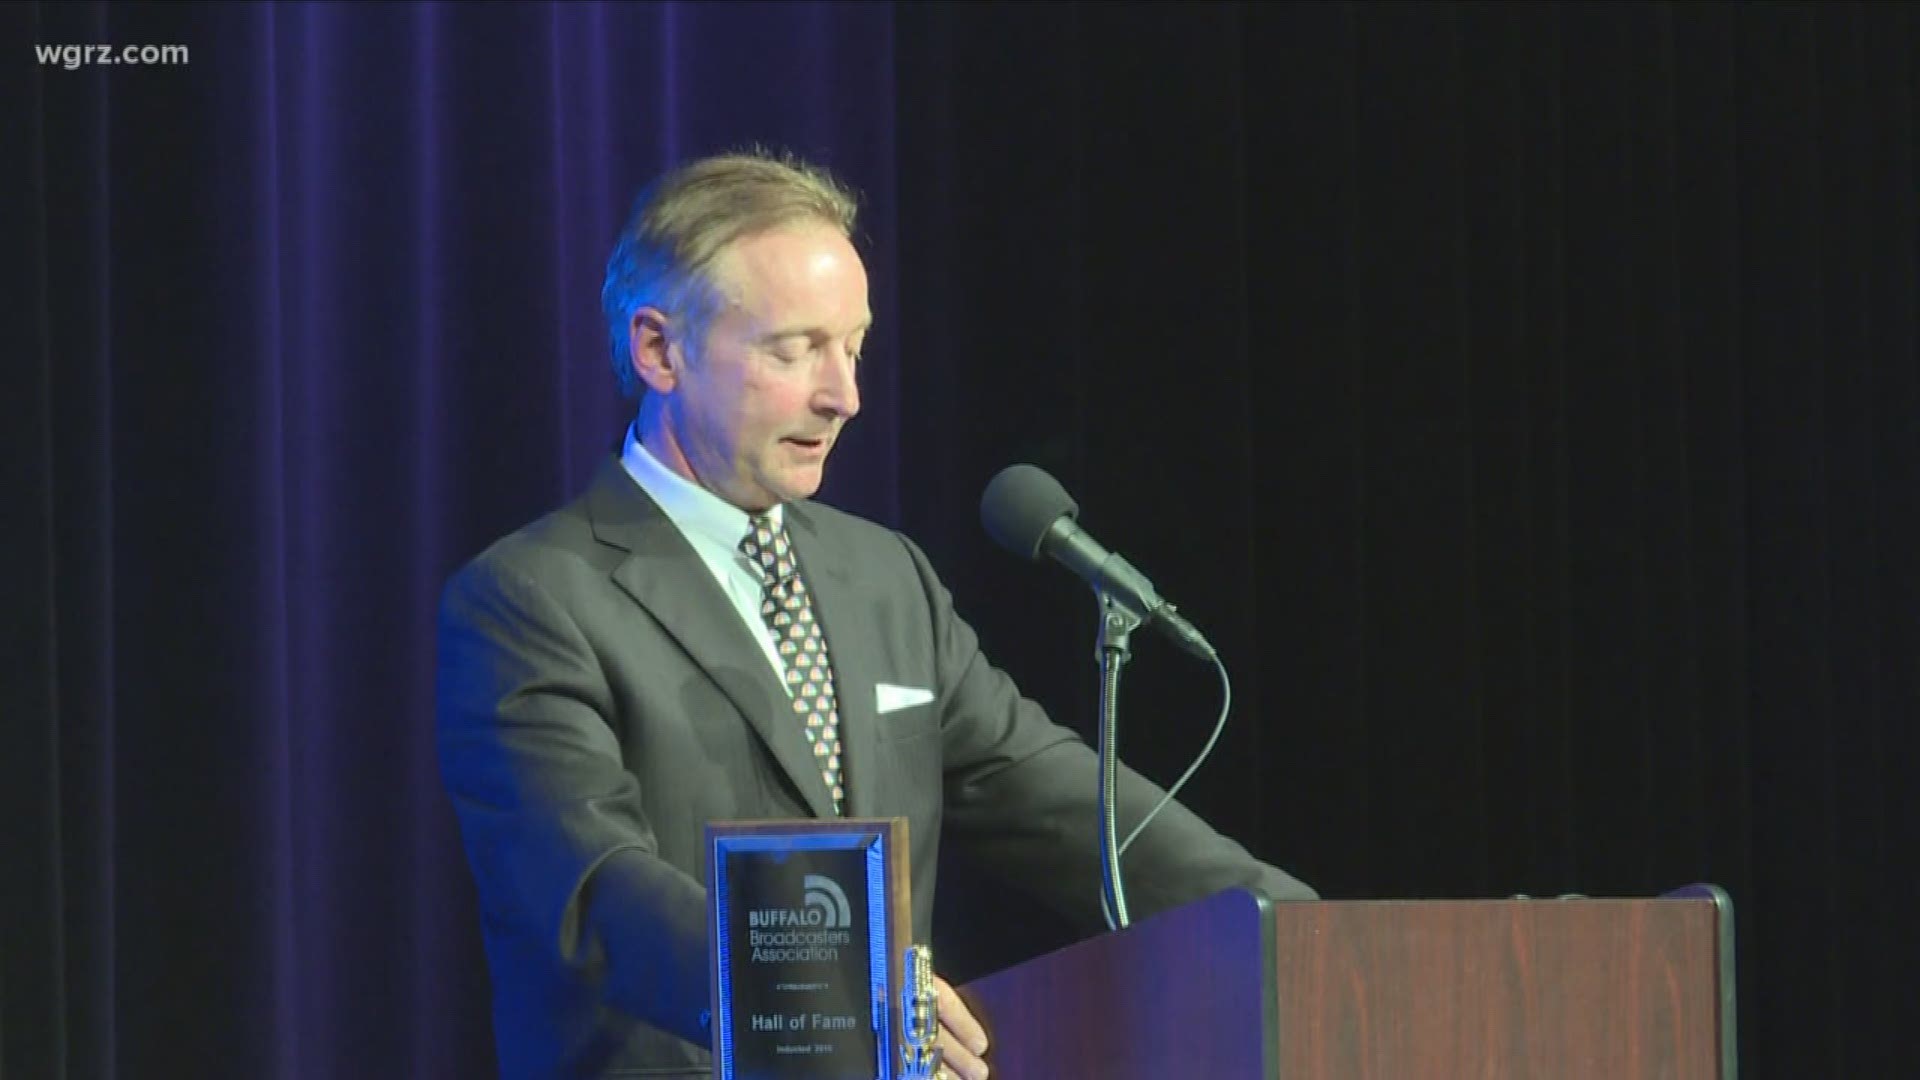 Our President and General Manager Jim Toellner was inducted into the Buffalo Broadcasters Hall of Fame tonight. Jim's been leading our team for 16 years.